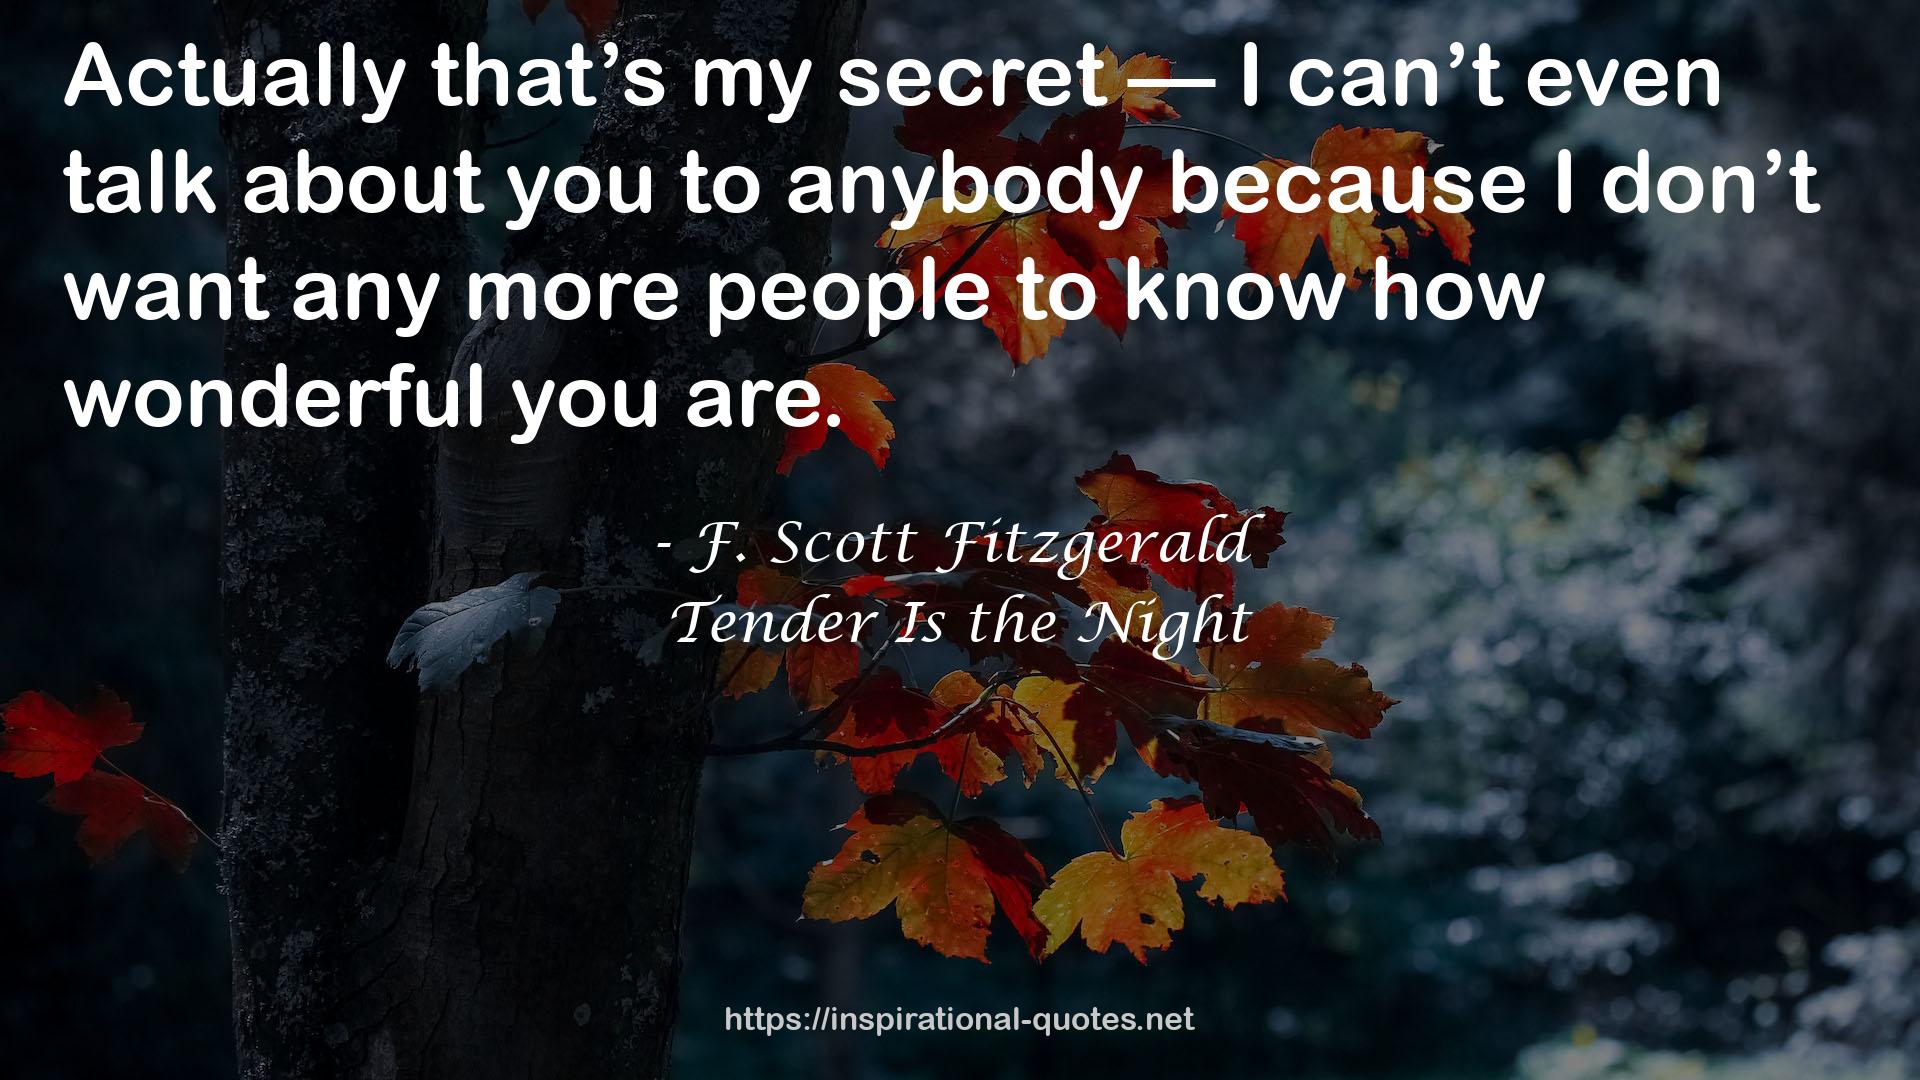 Tender Is the Night QUOTES